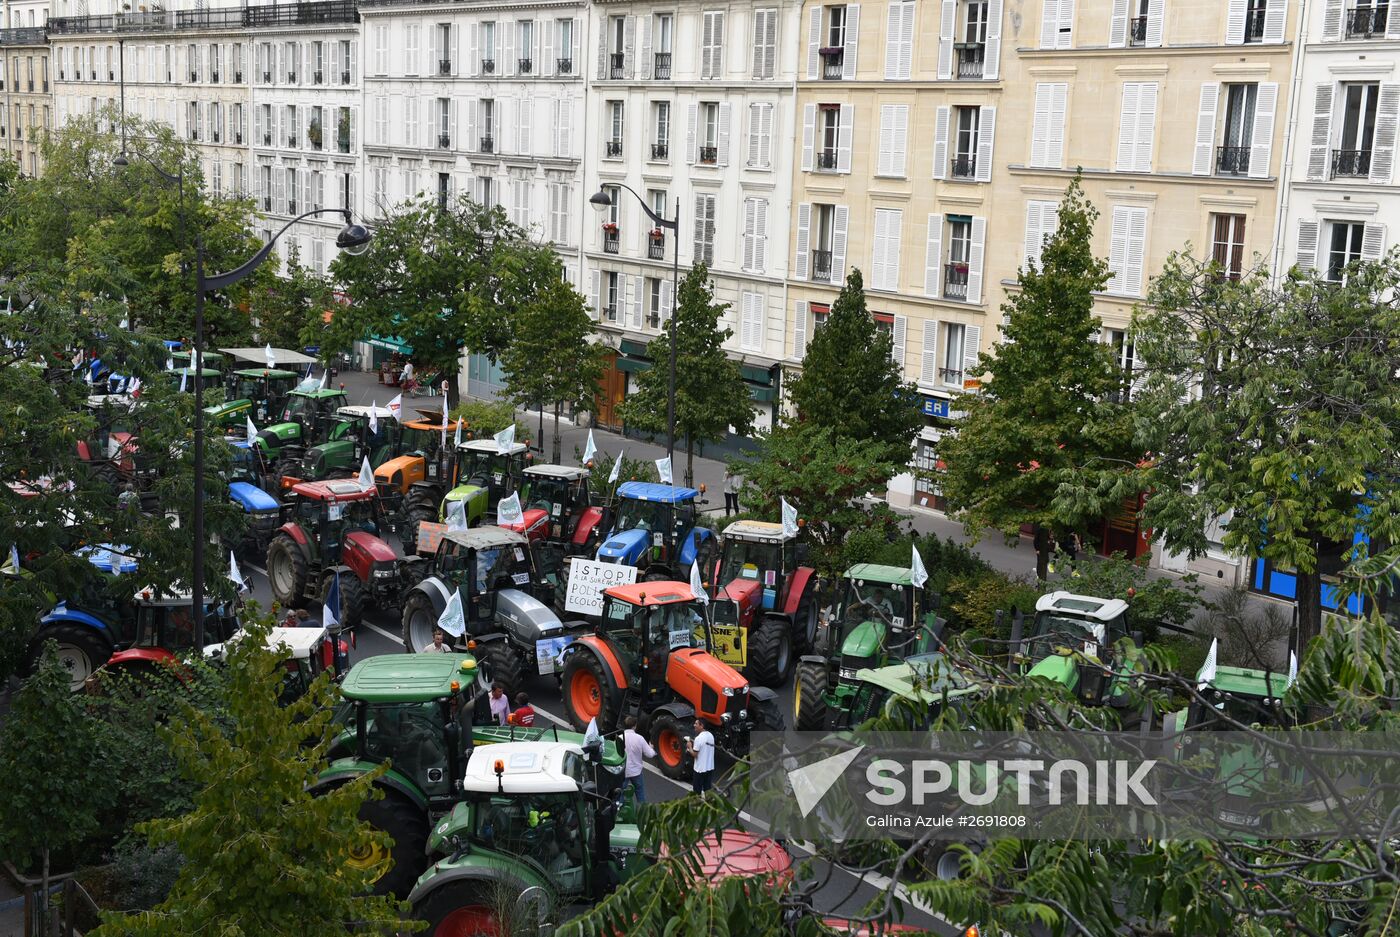 Farmers stage protests in Paris